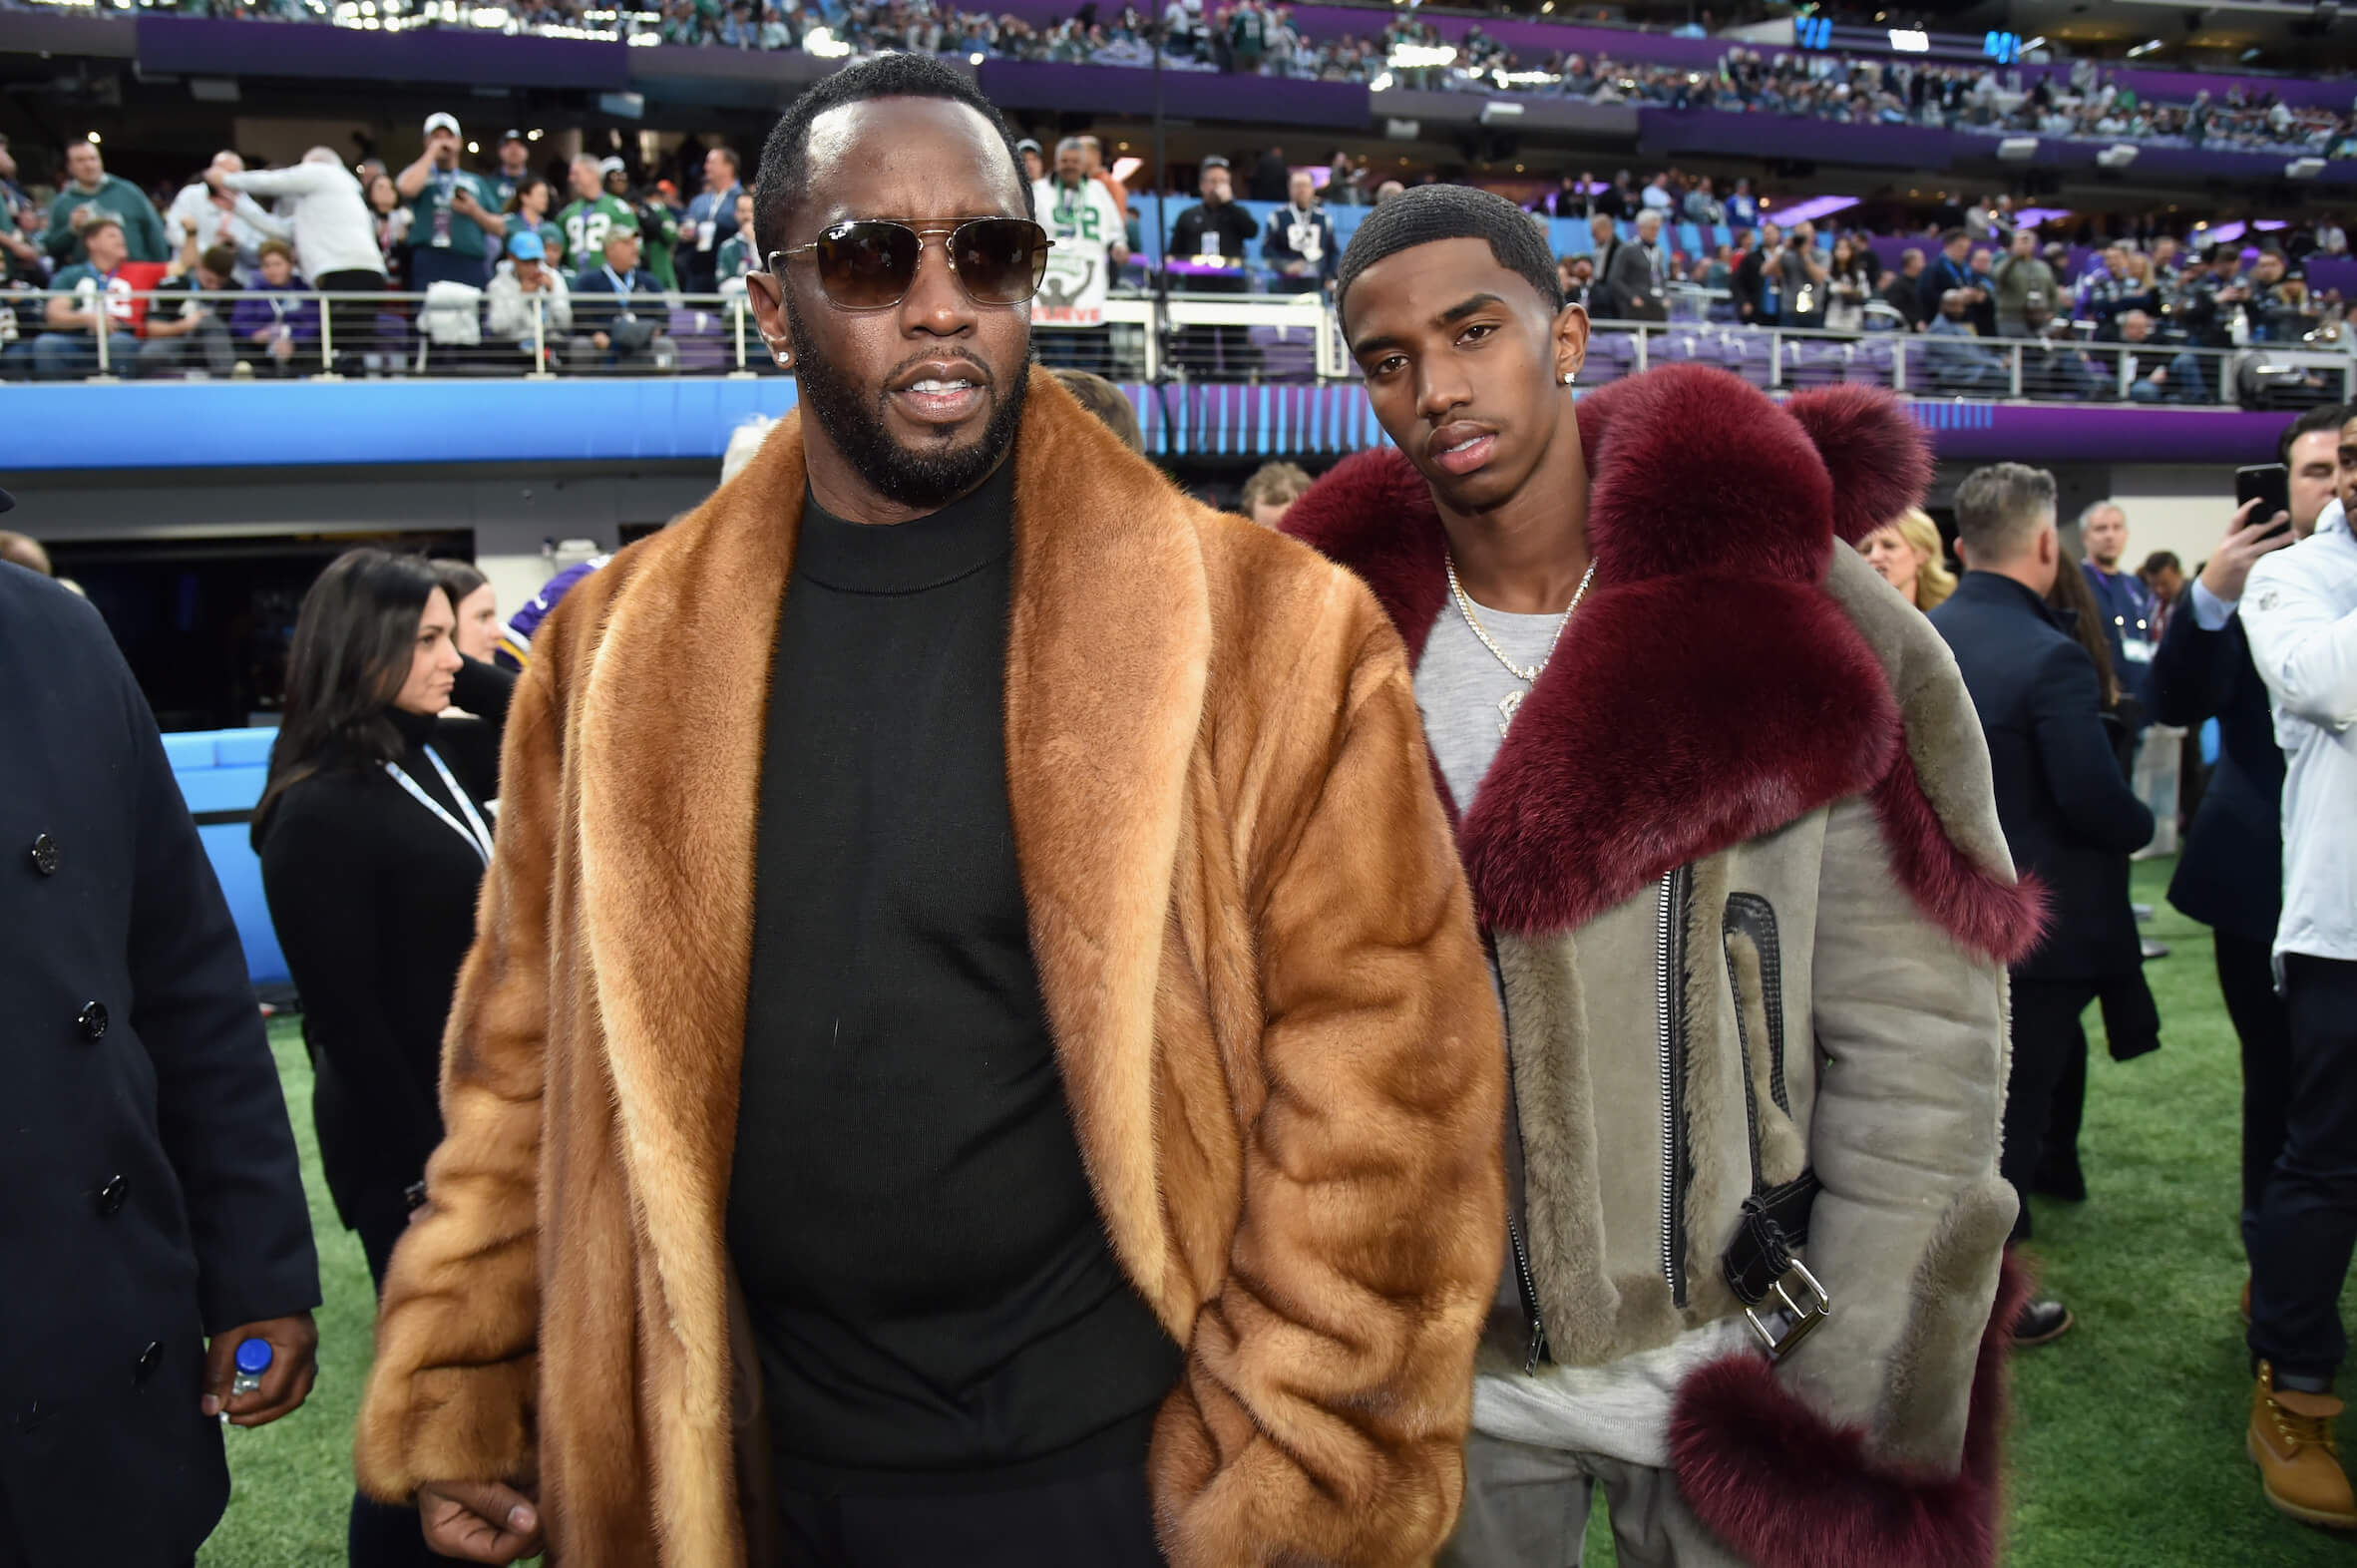 Sean 'P. Diddy' Combs standing next to his son, Christian 'King' Combs, at the Super Bowl in 2018